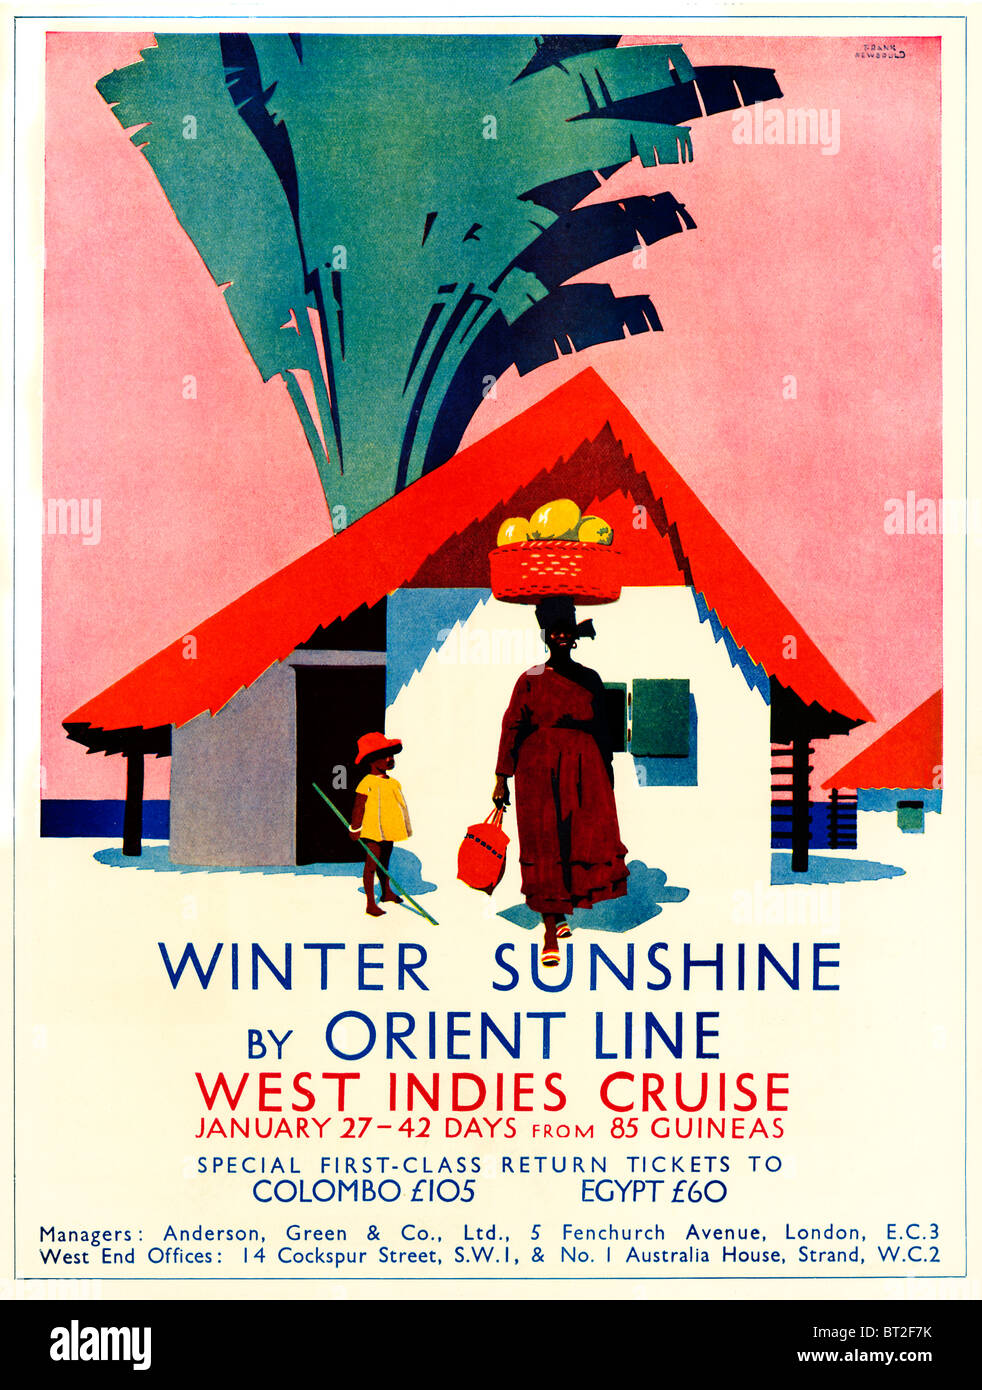 Orient Line, Winter Sunshine, 1931 advert for the Cruise Line part owned by P&O, here illustrating cruises to the West Indies Stock Photo